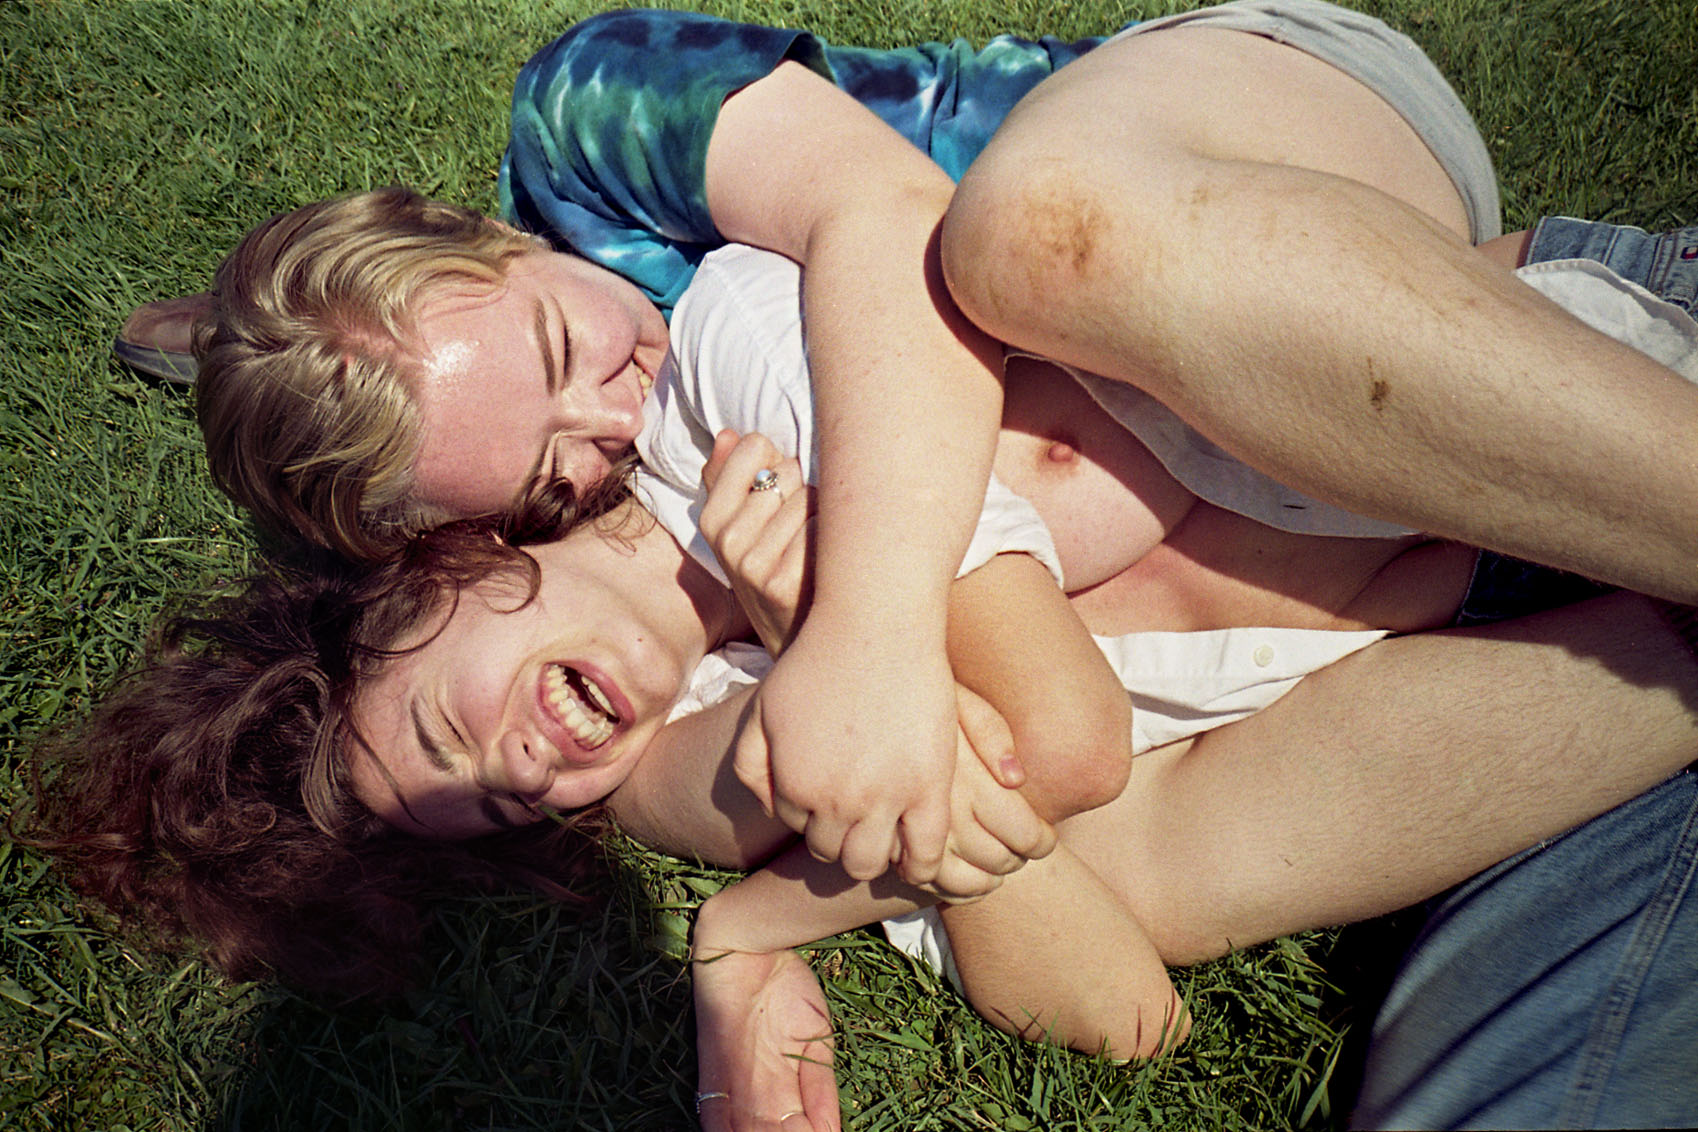   Ruby and Karlyn in the grass, 2018.    © Cameron Schiller  